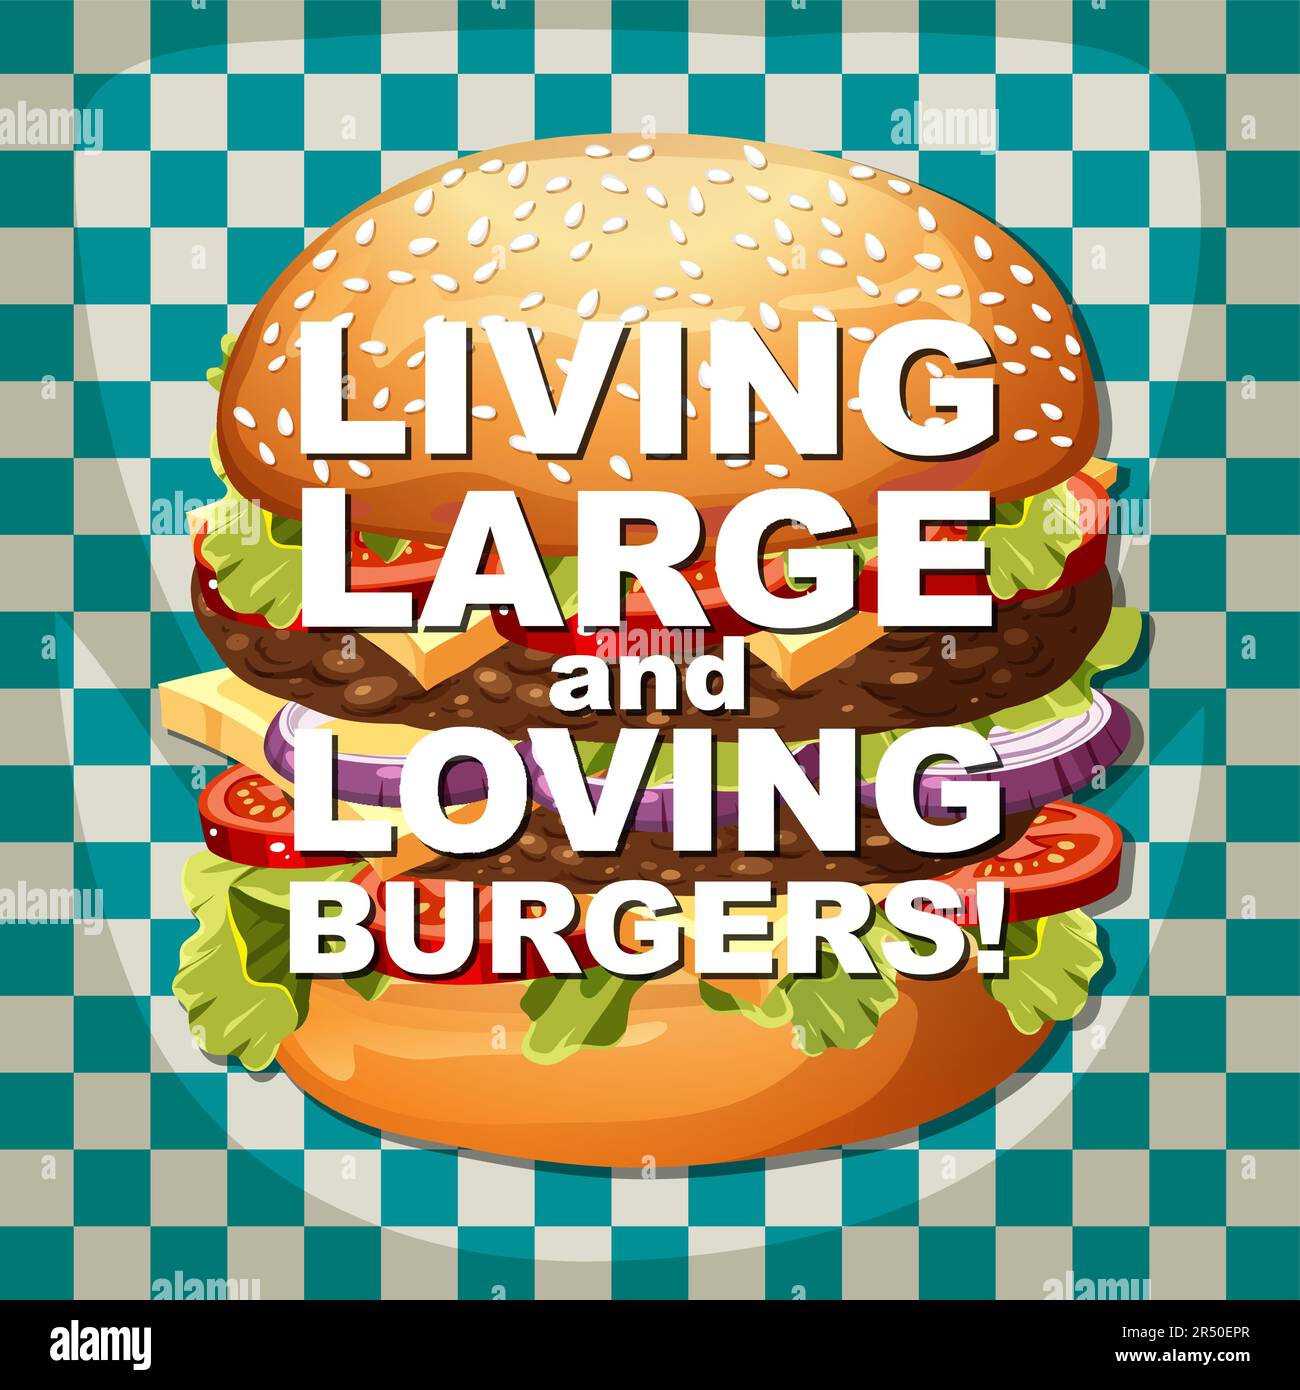 Living large and loving burgers icon cartoon illustration Stock Vector ...